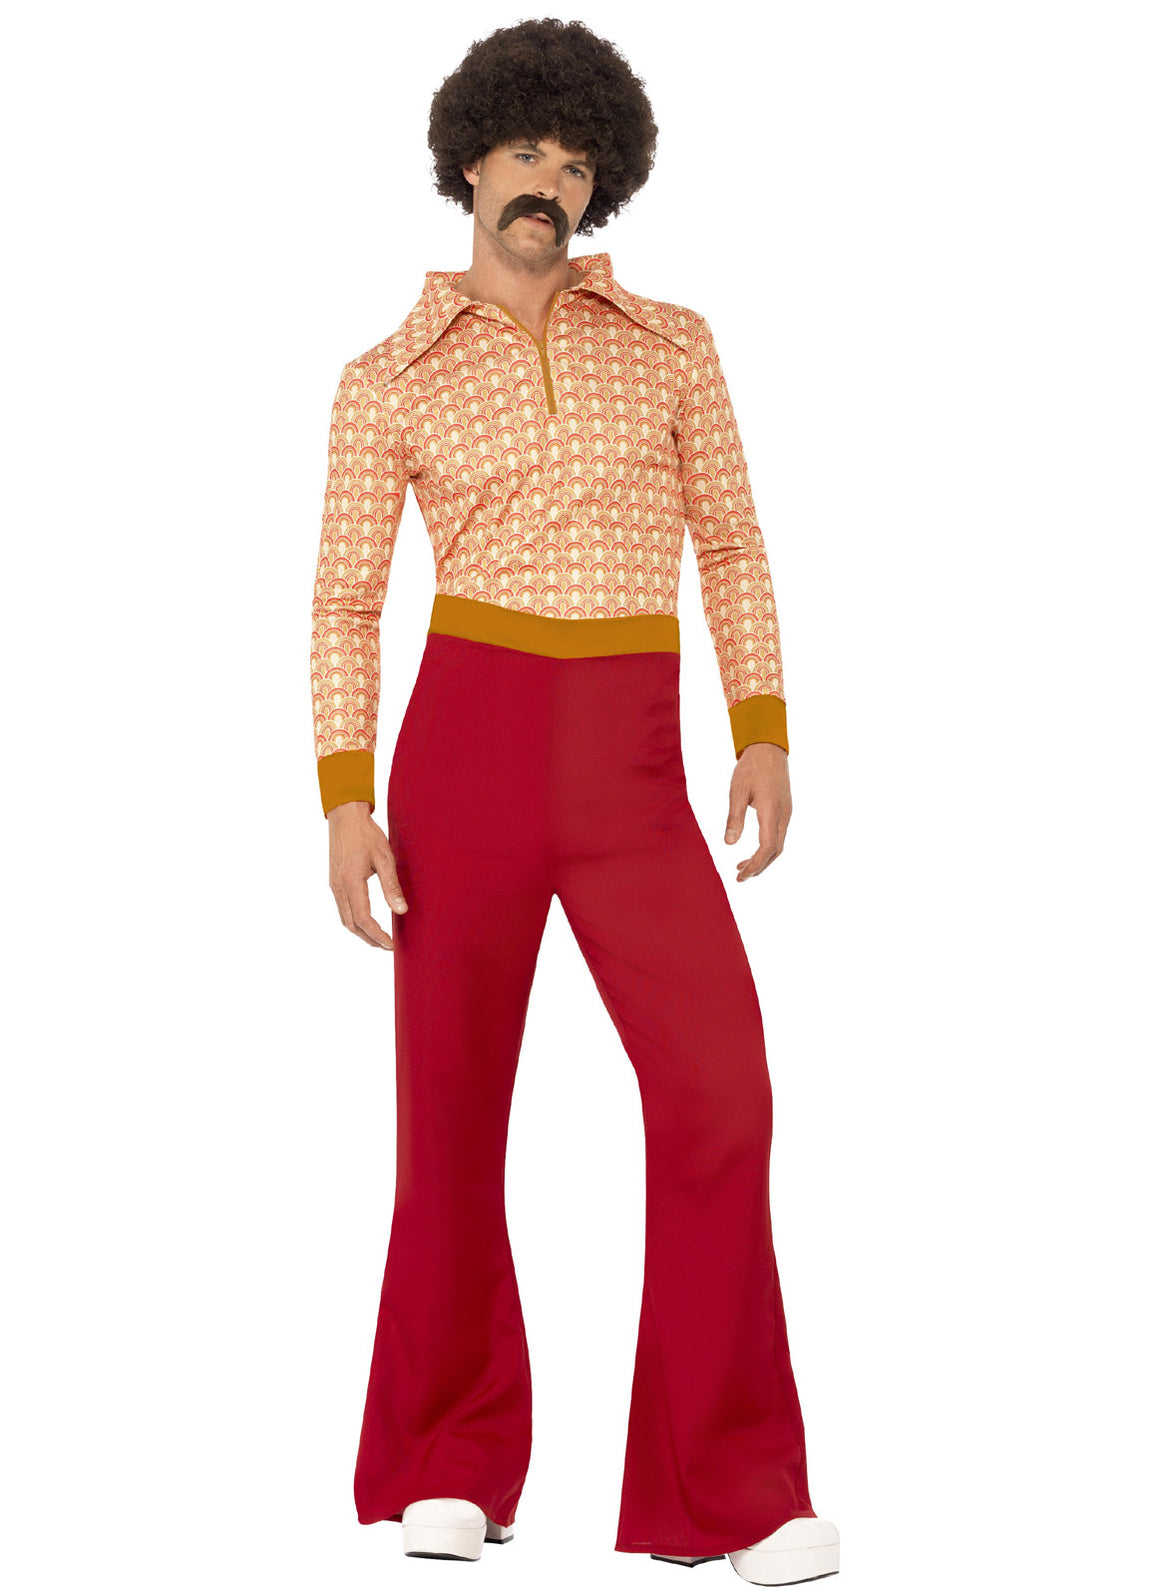 Authentic 70's Guy Costume Adult — Party Britain